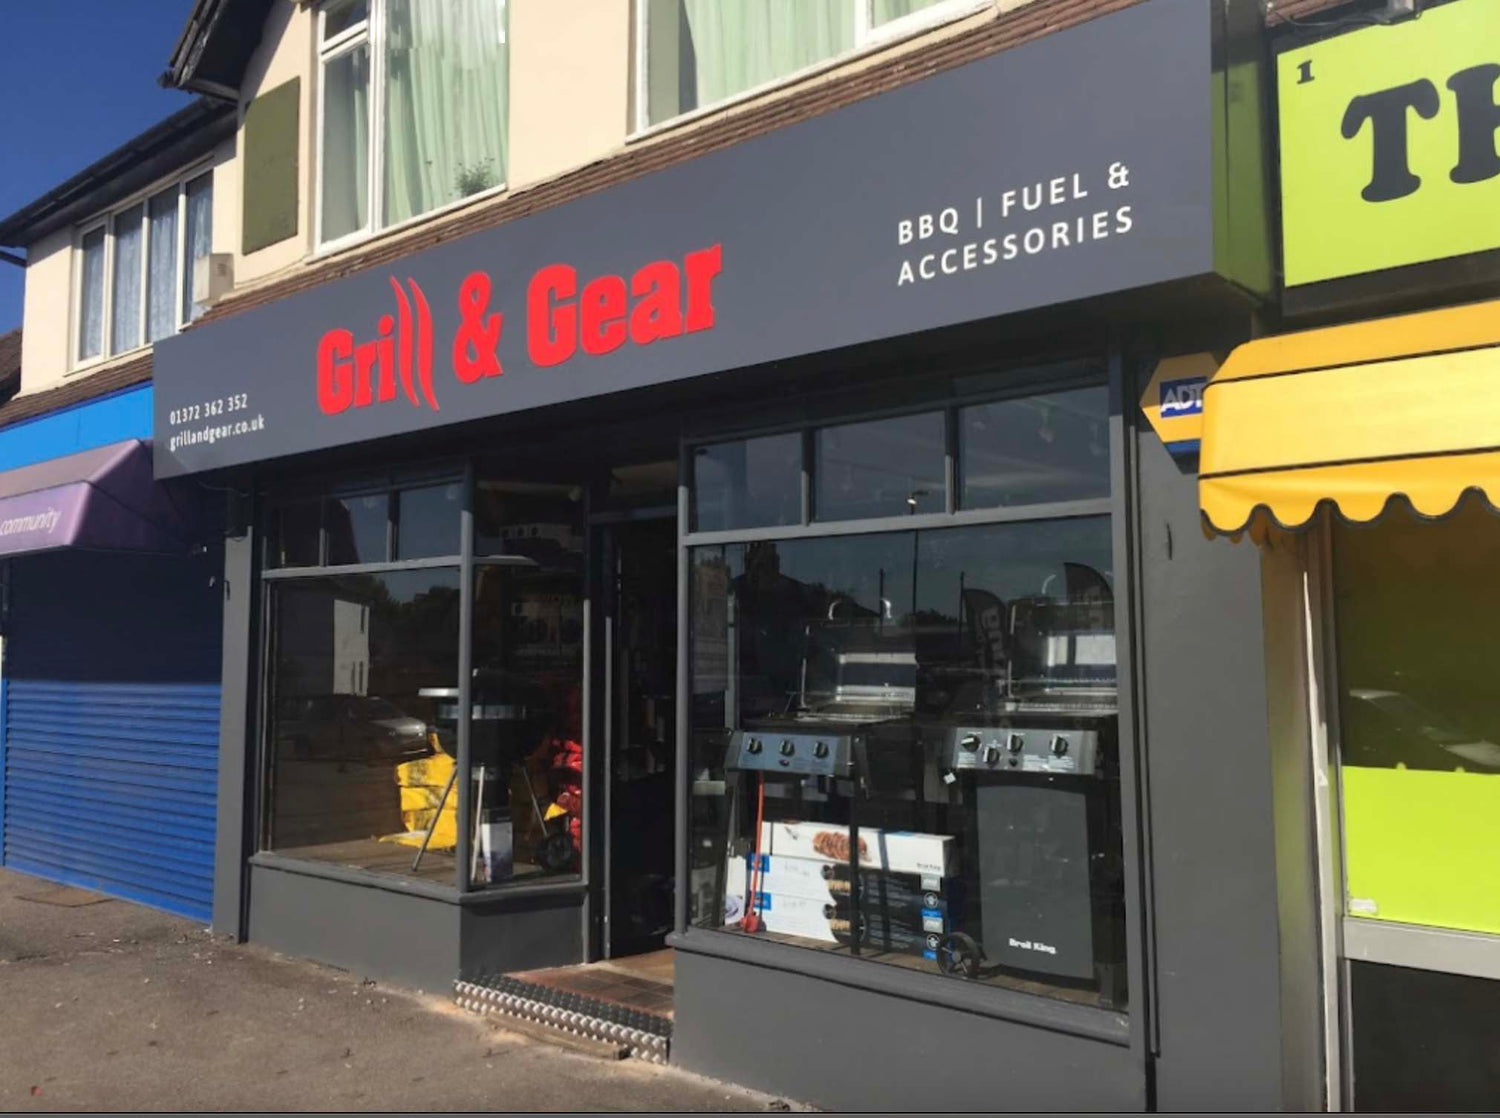 Grill & Gear Shop in Hampshire